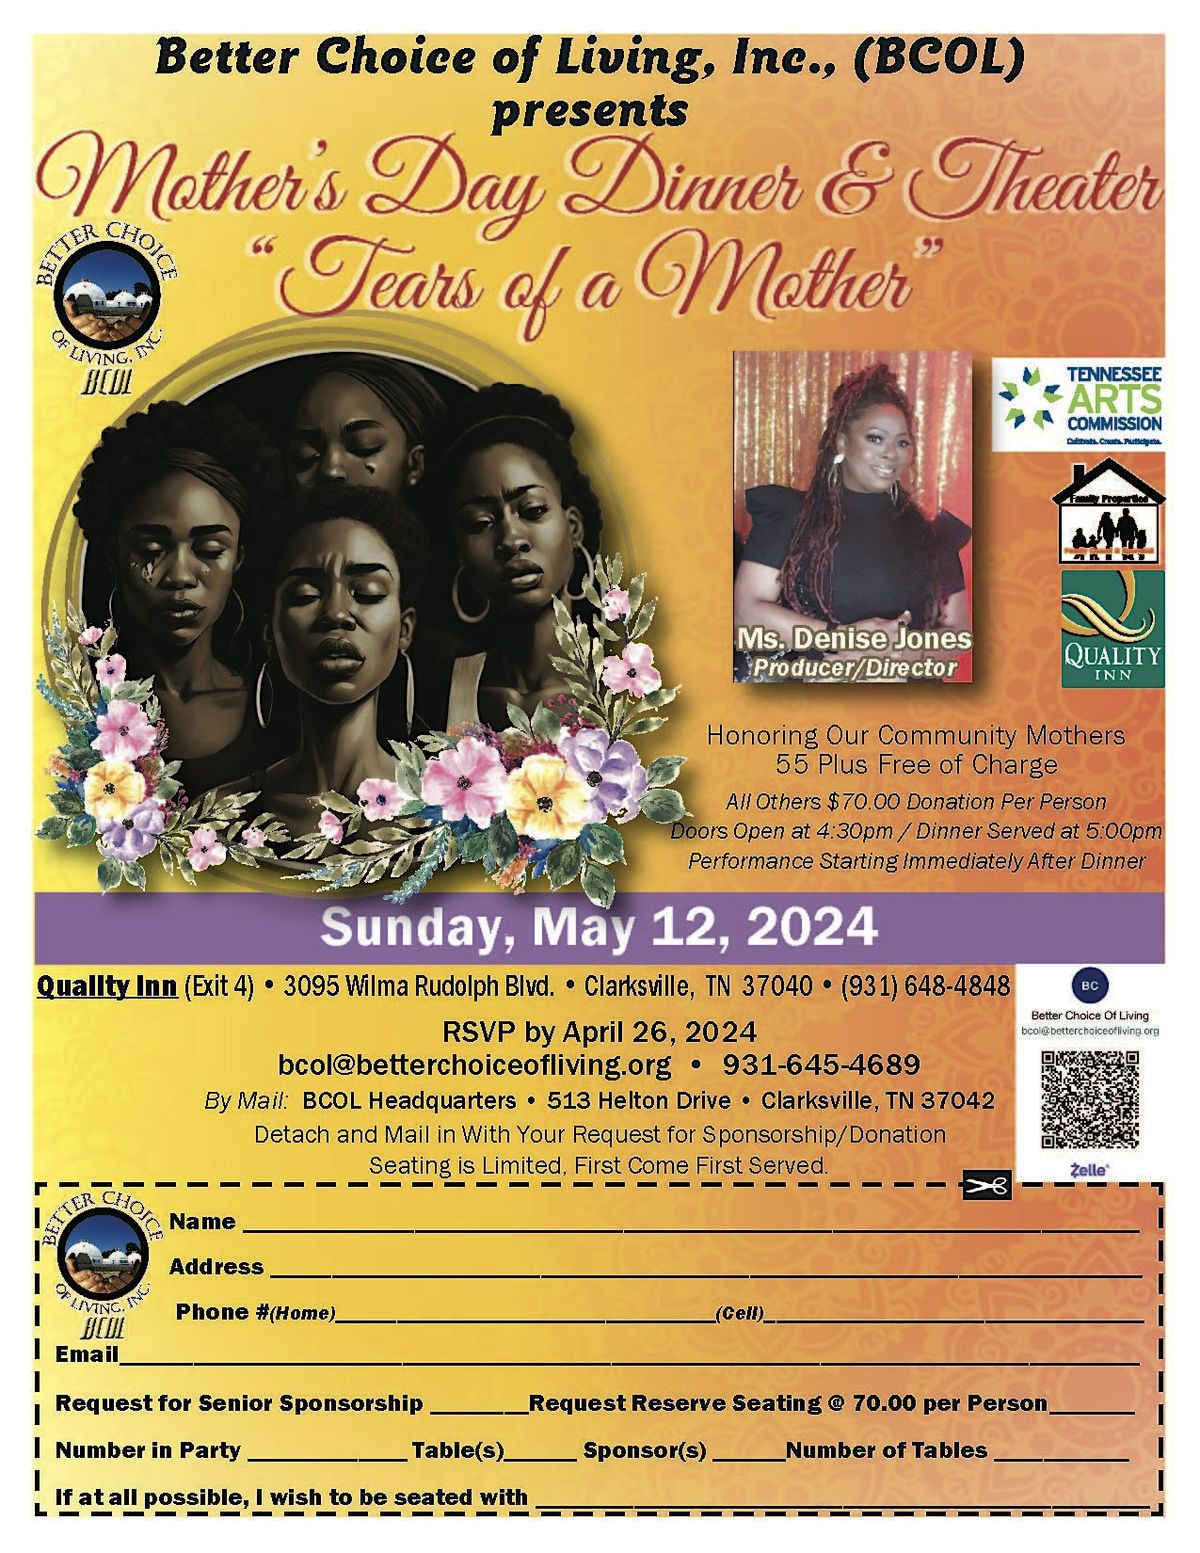 BCOL Presents Mother's Day Dinner & Theater "Tears of a Mother"